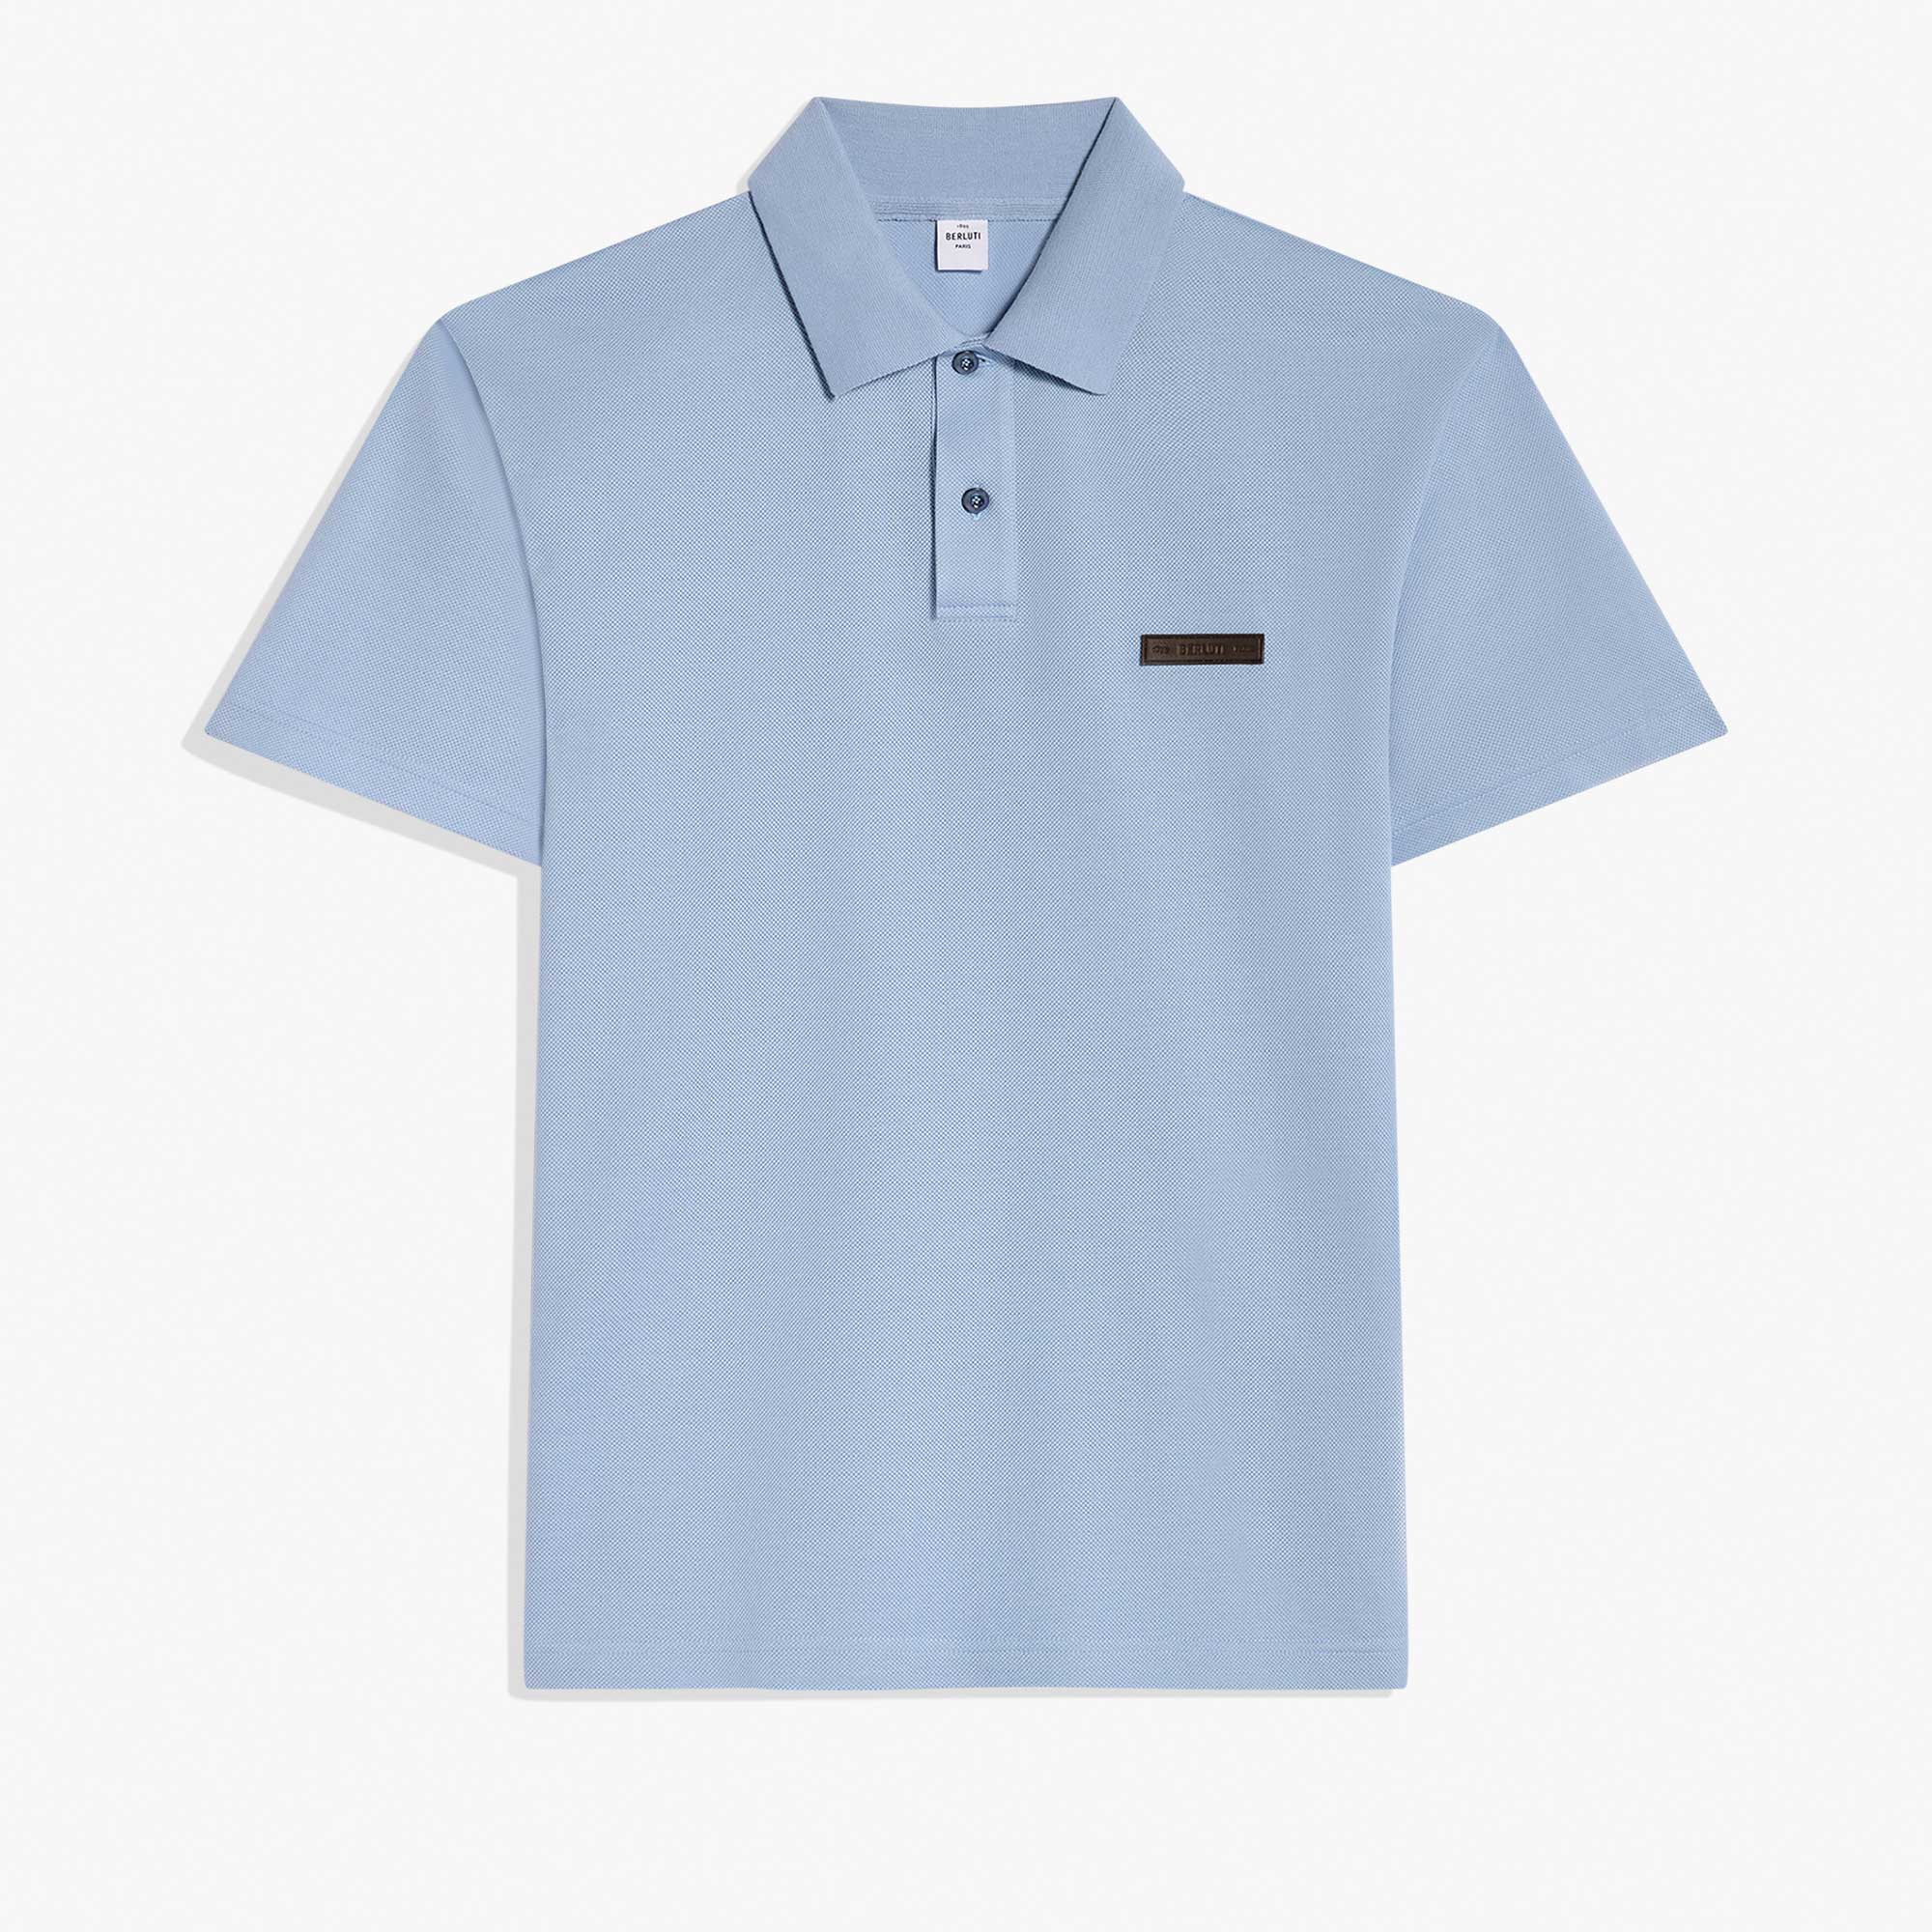 Classic Pique Leather Tab Polo, PALE BLUE, hi-res